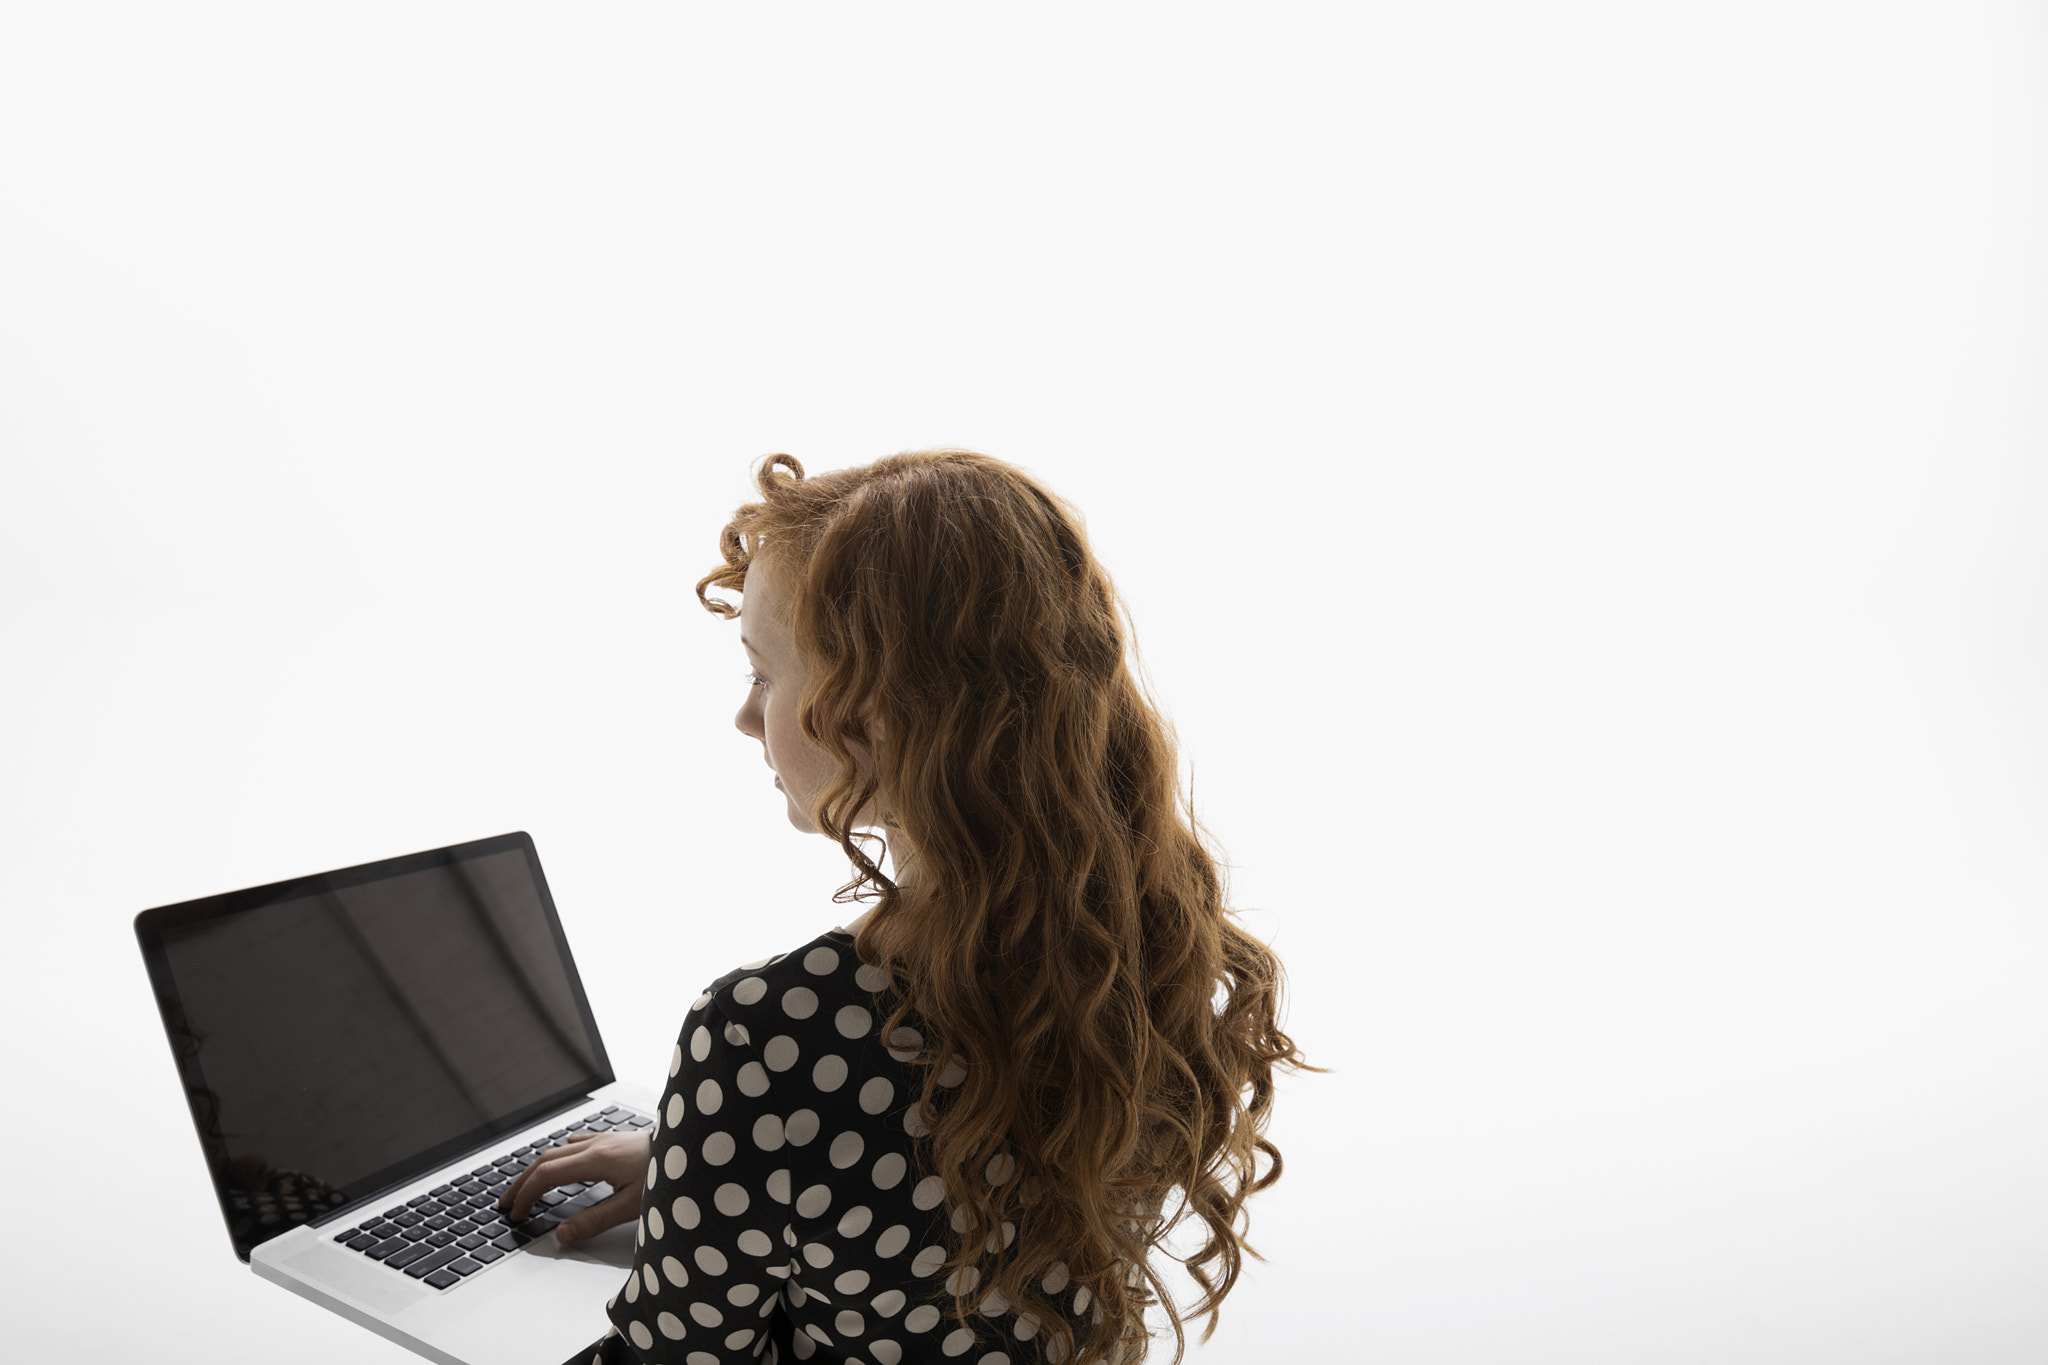 Businesswoman using laptop against white background